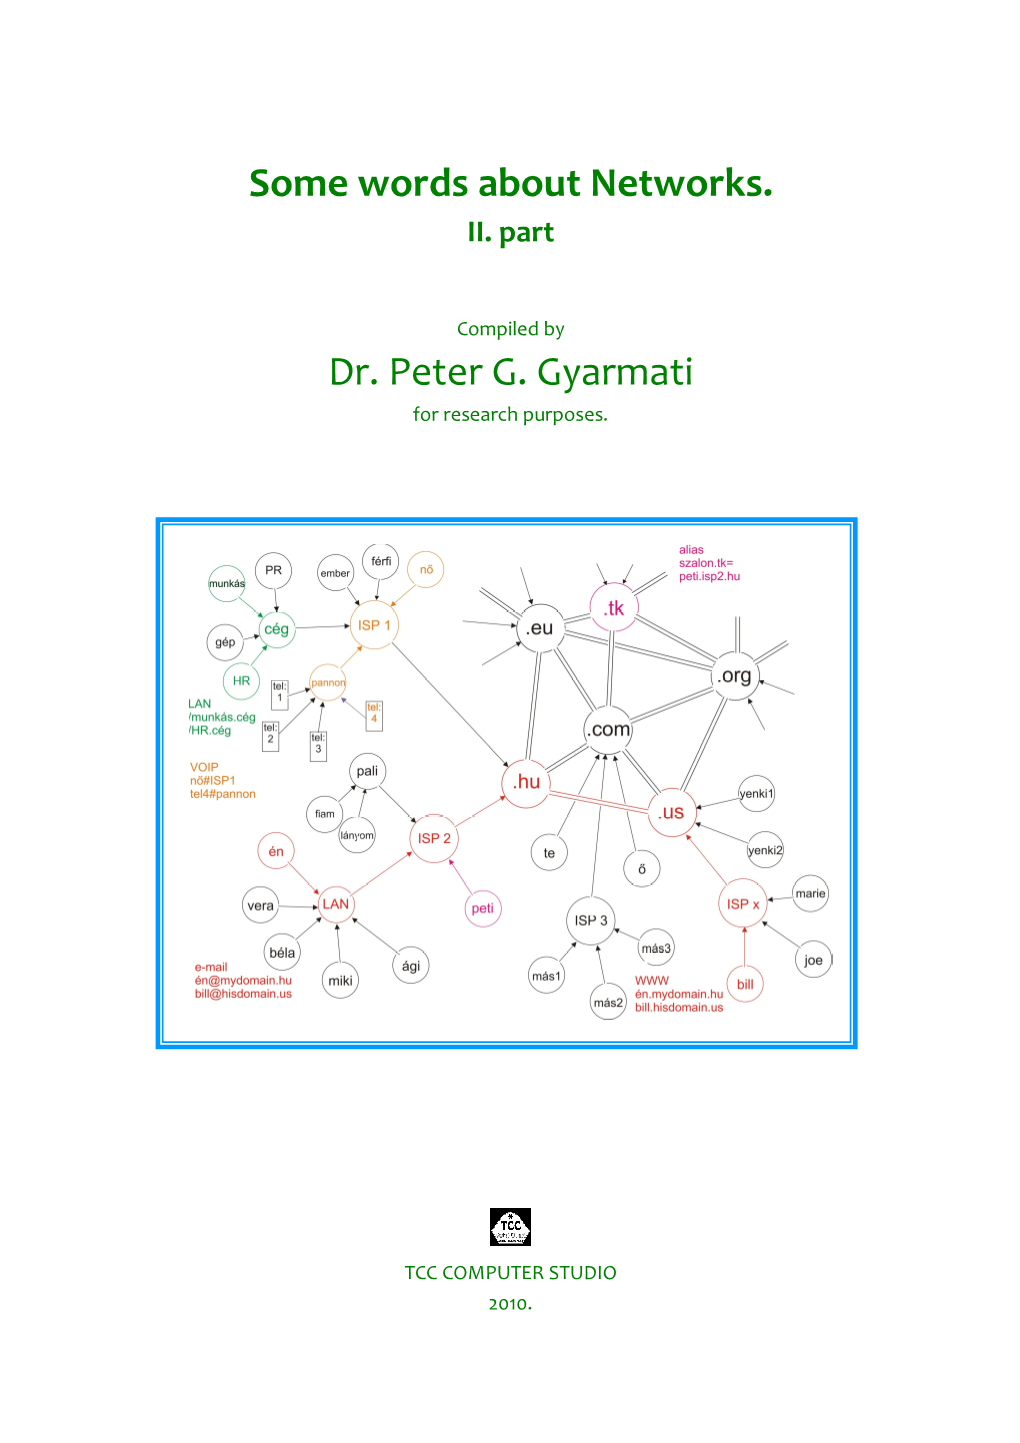 Some Words About Networks. Dr. Peter G. Gyarmati